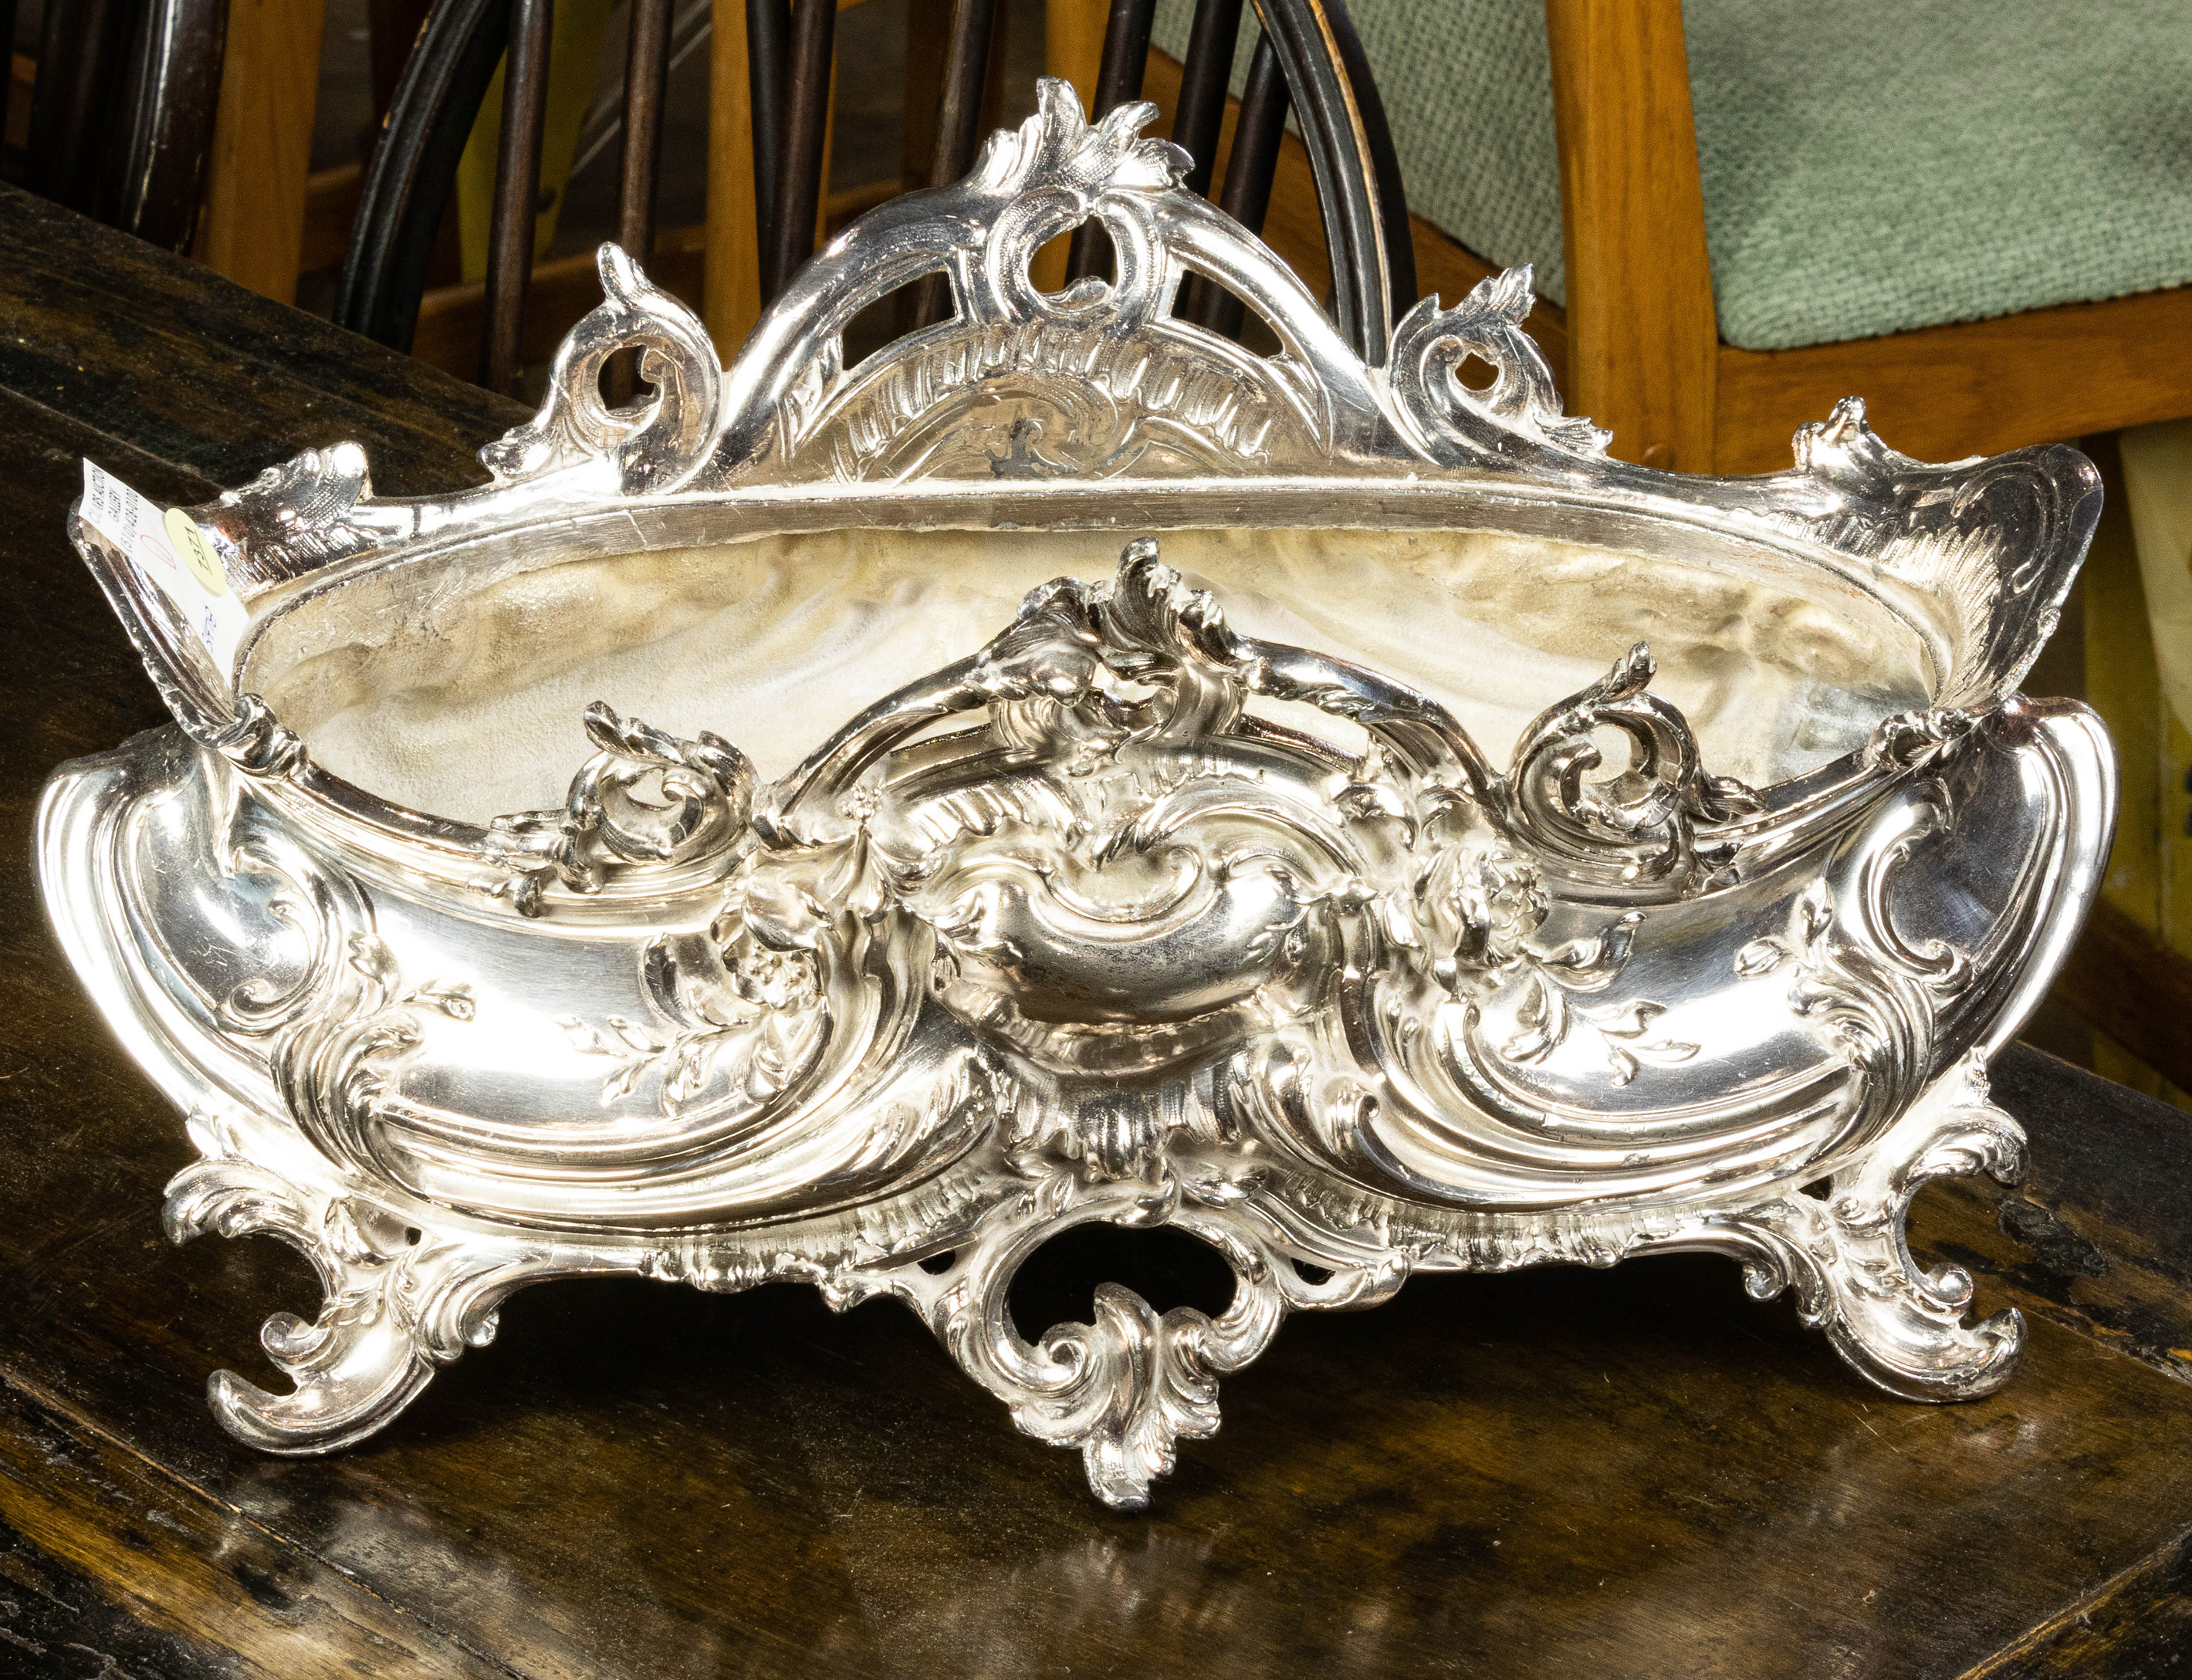 A ROCOCO STYLE SILVER PLATED CENTERPIECE 3a4a87